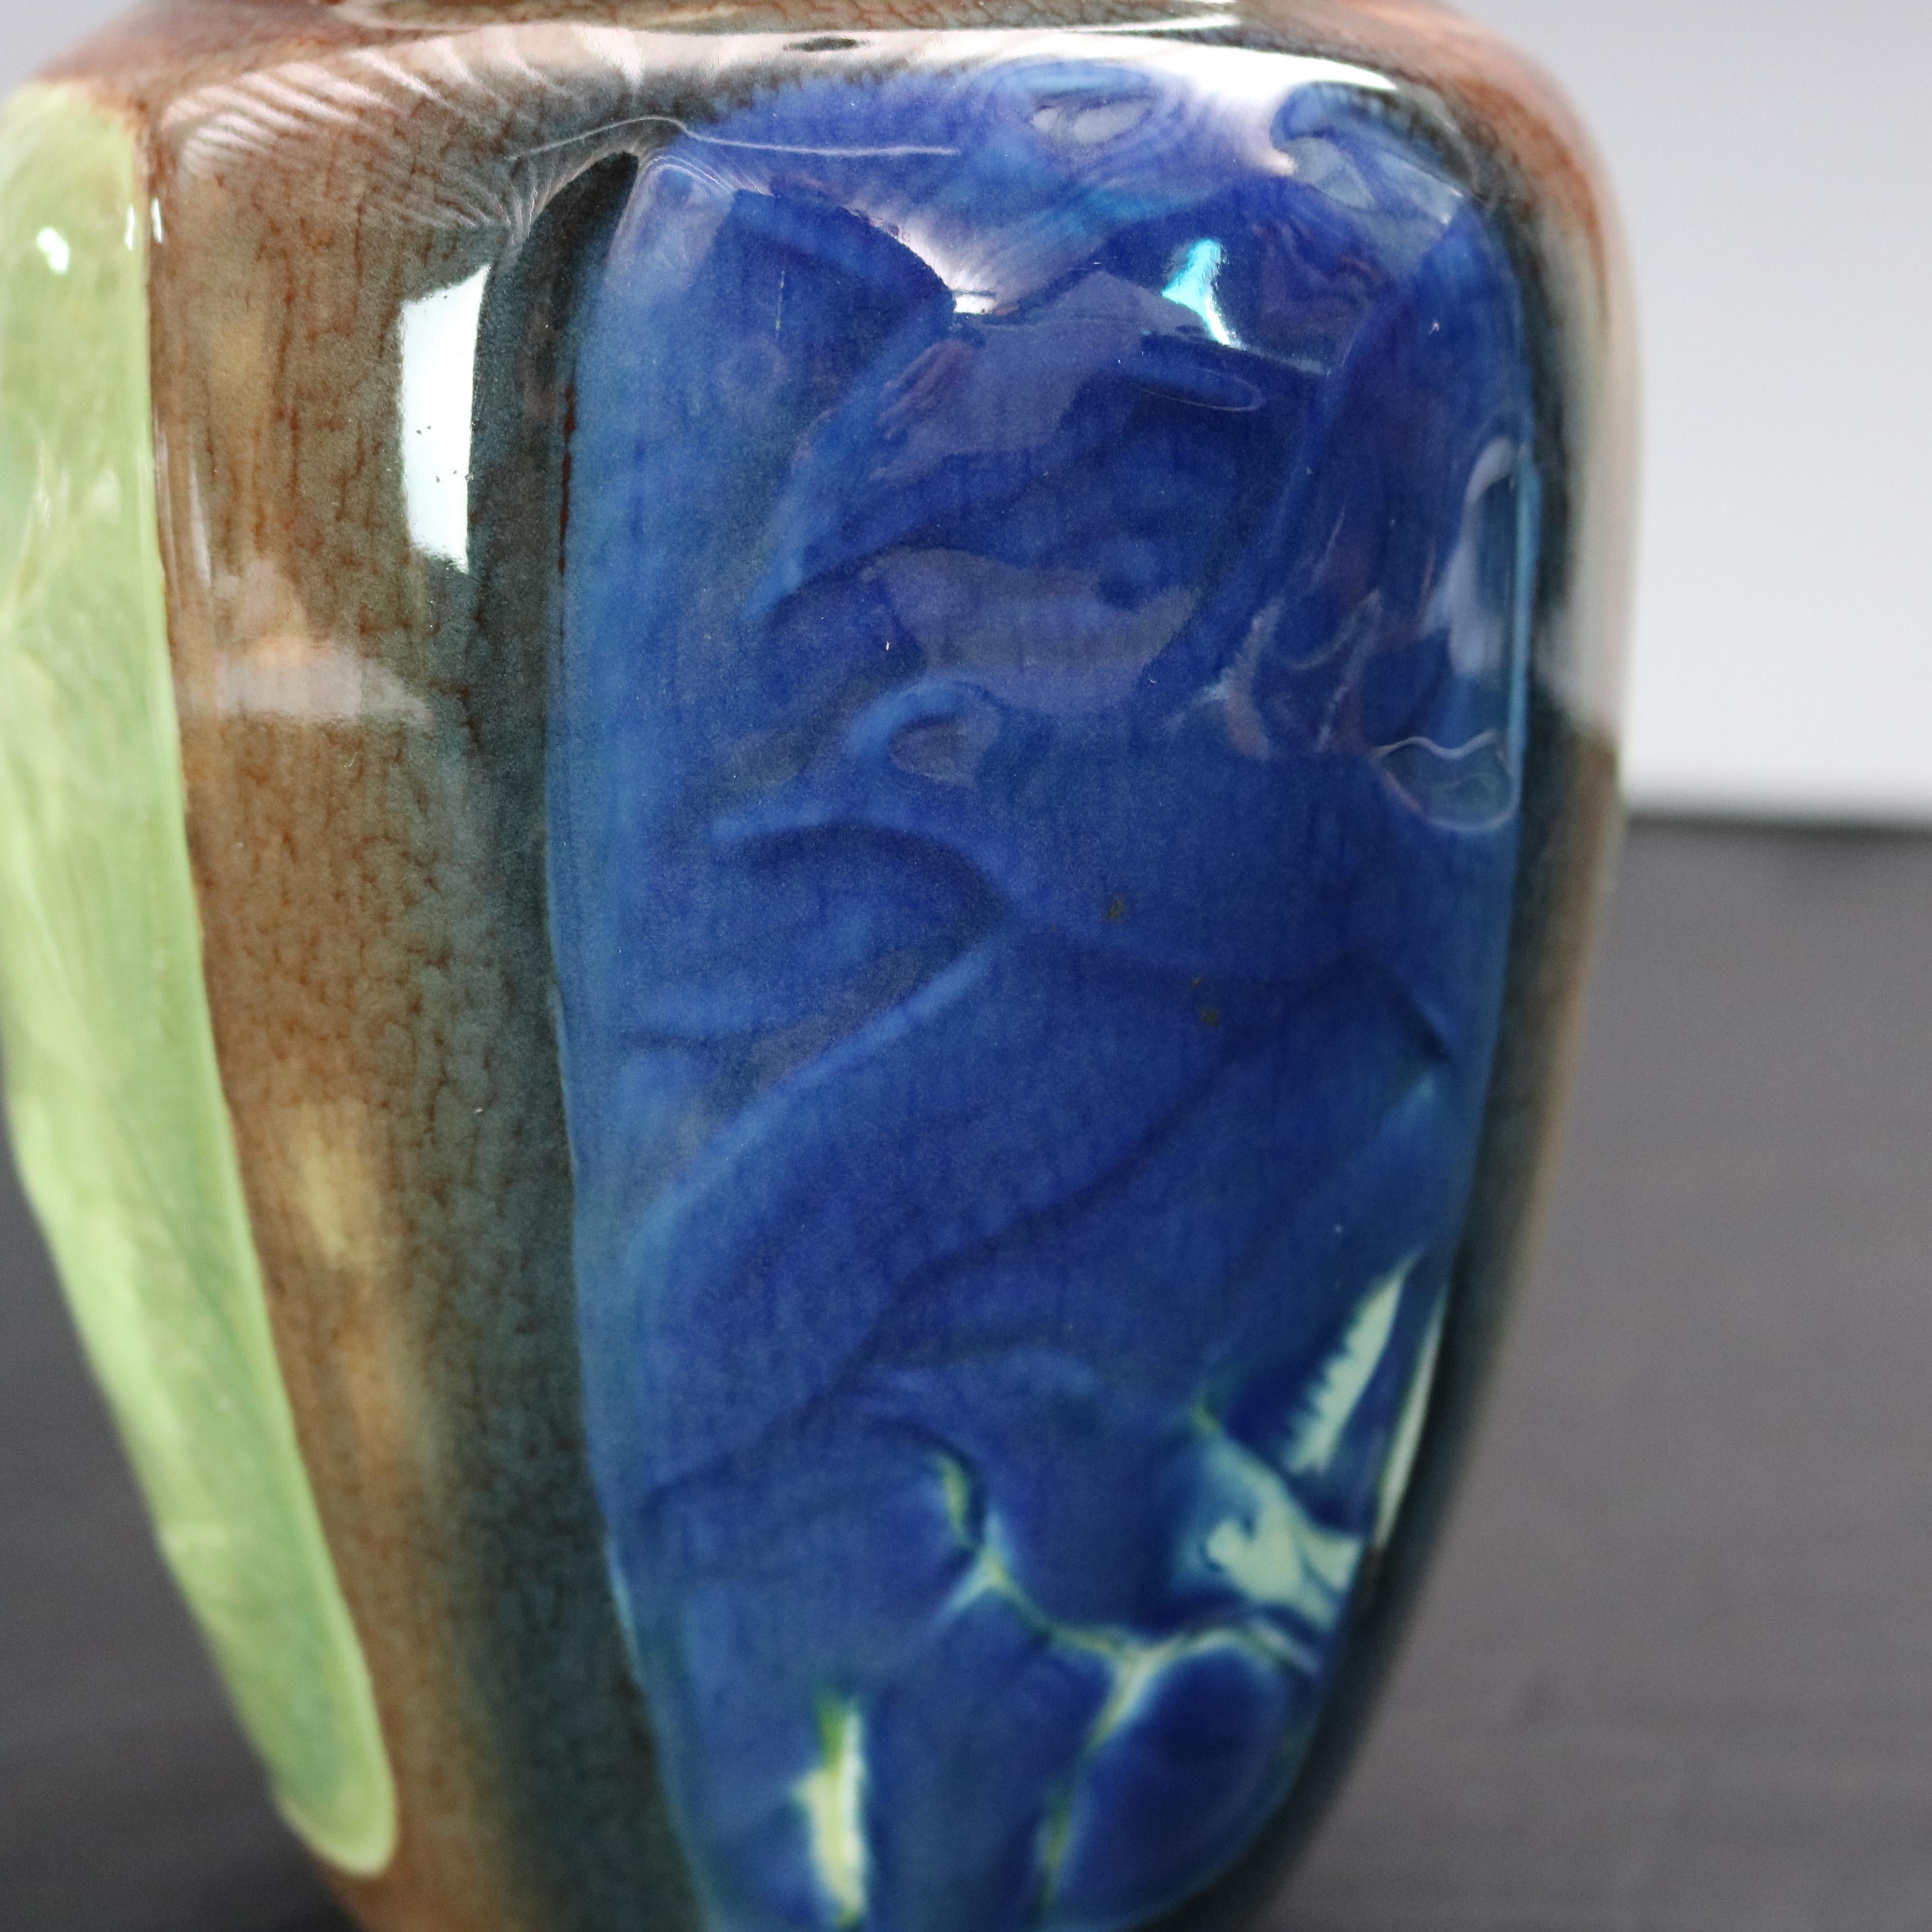 A rare vintage art pottery vase by Rookwood offers paneled form with reserves of birds, frog and fish in iris glaze, signed and dated as photographed, 1939

Measures: 8.25